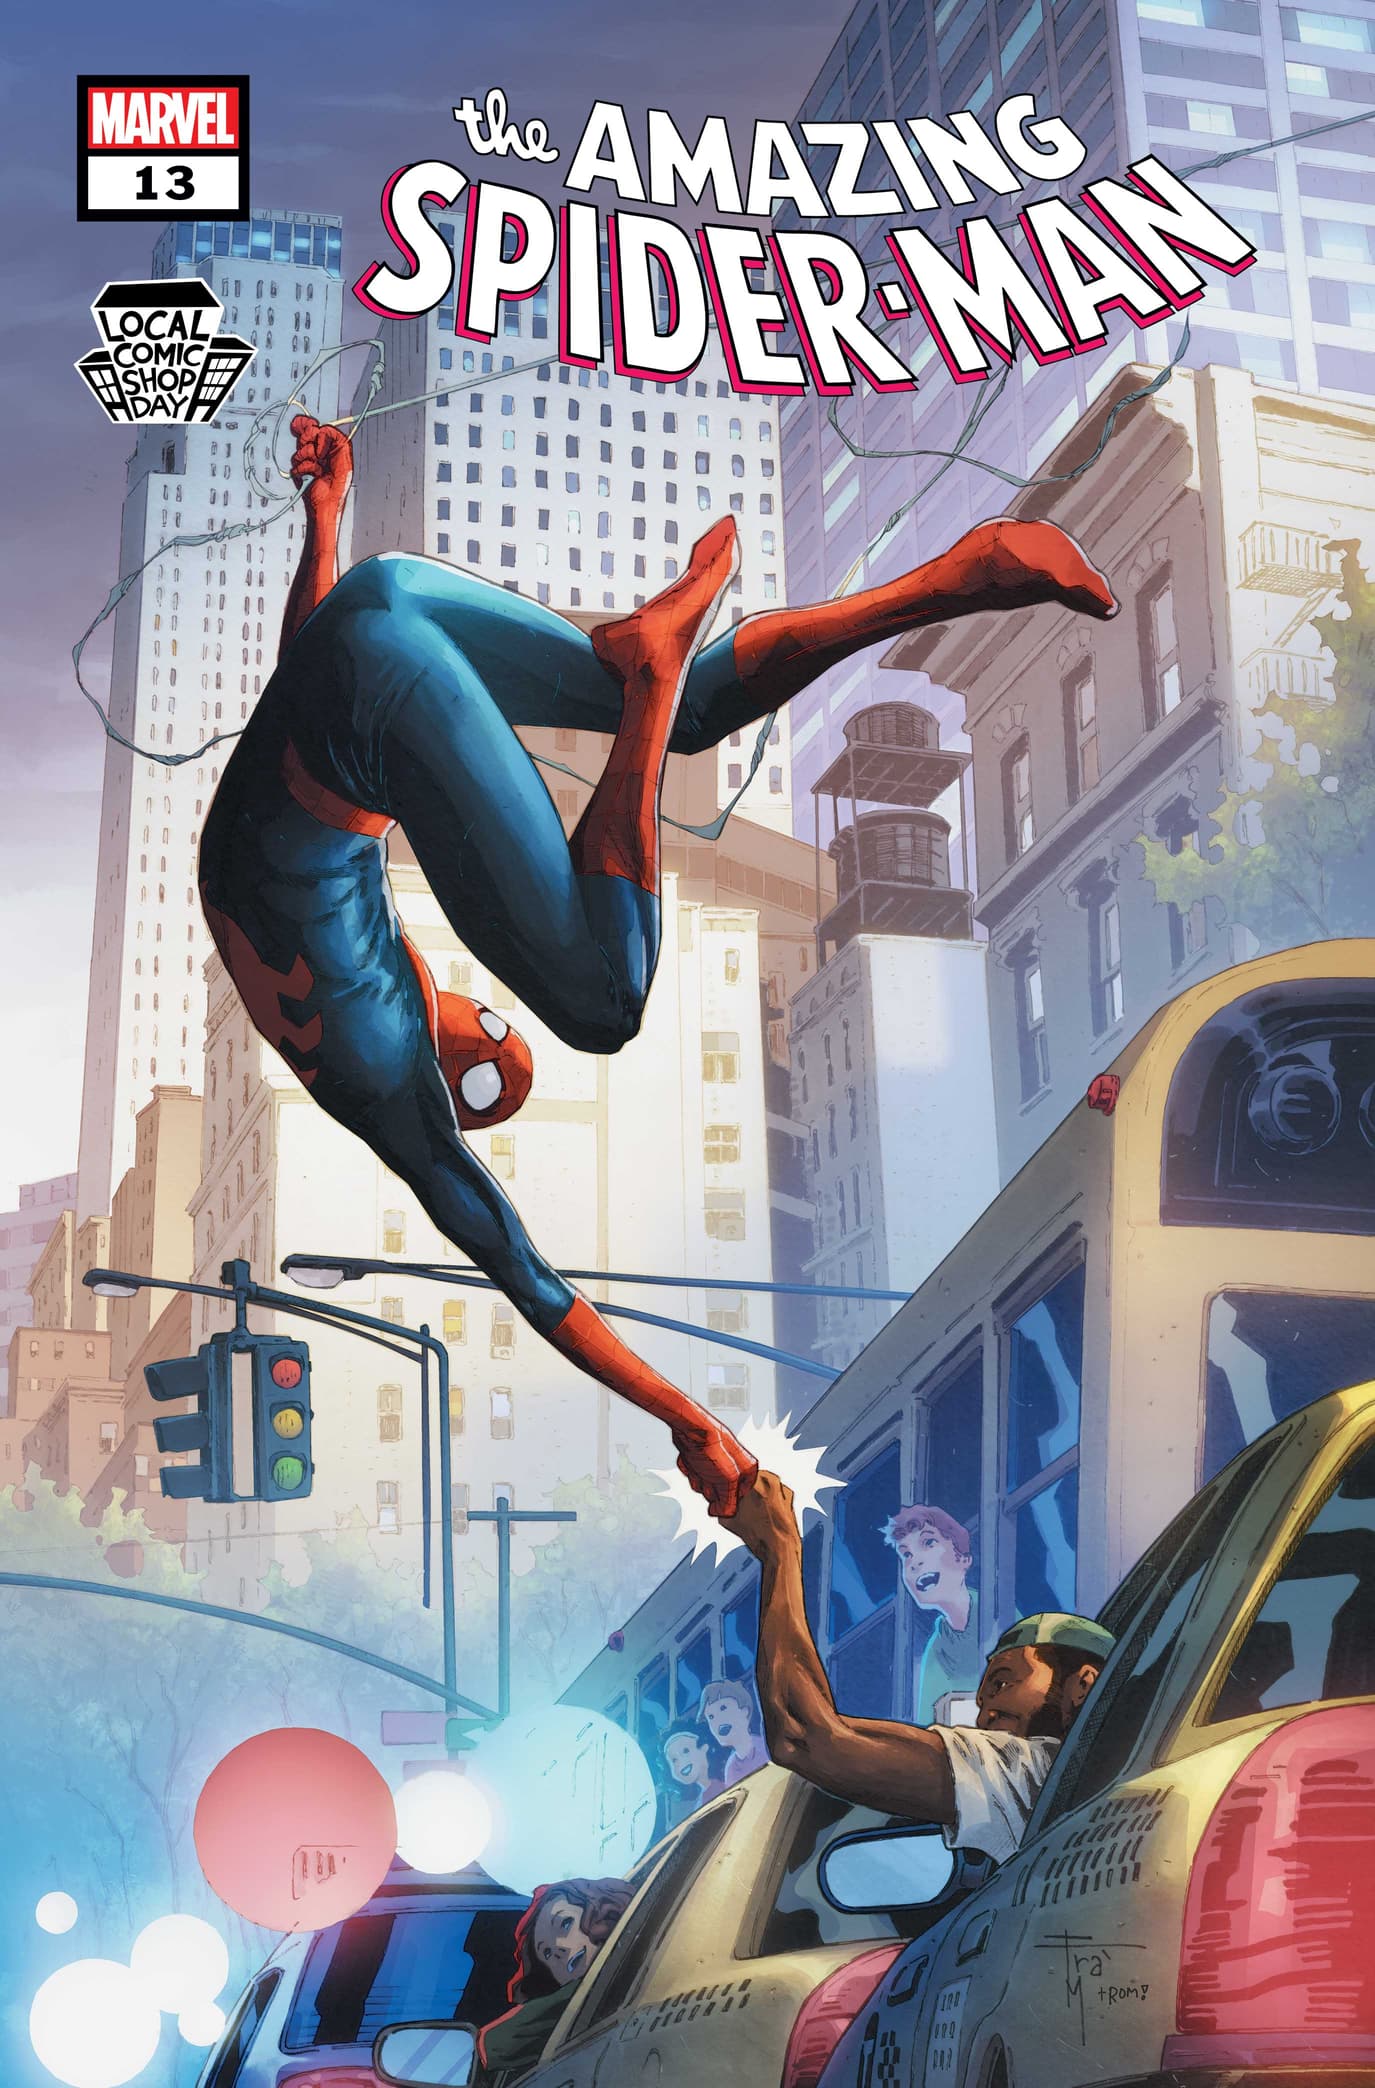 Amazing Spider-Man #13 Local Comic Shop Day Variant Cover by Francesco Mobili